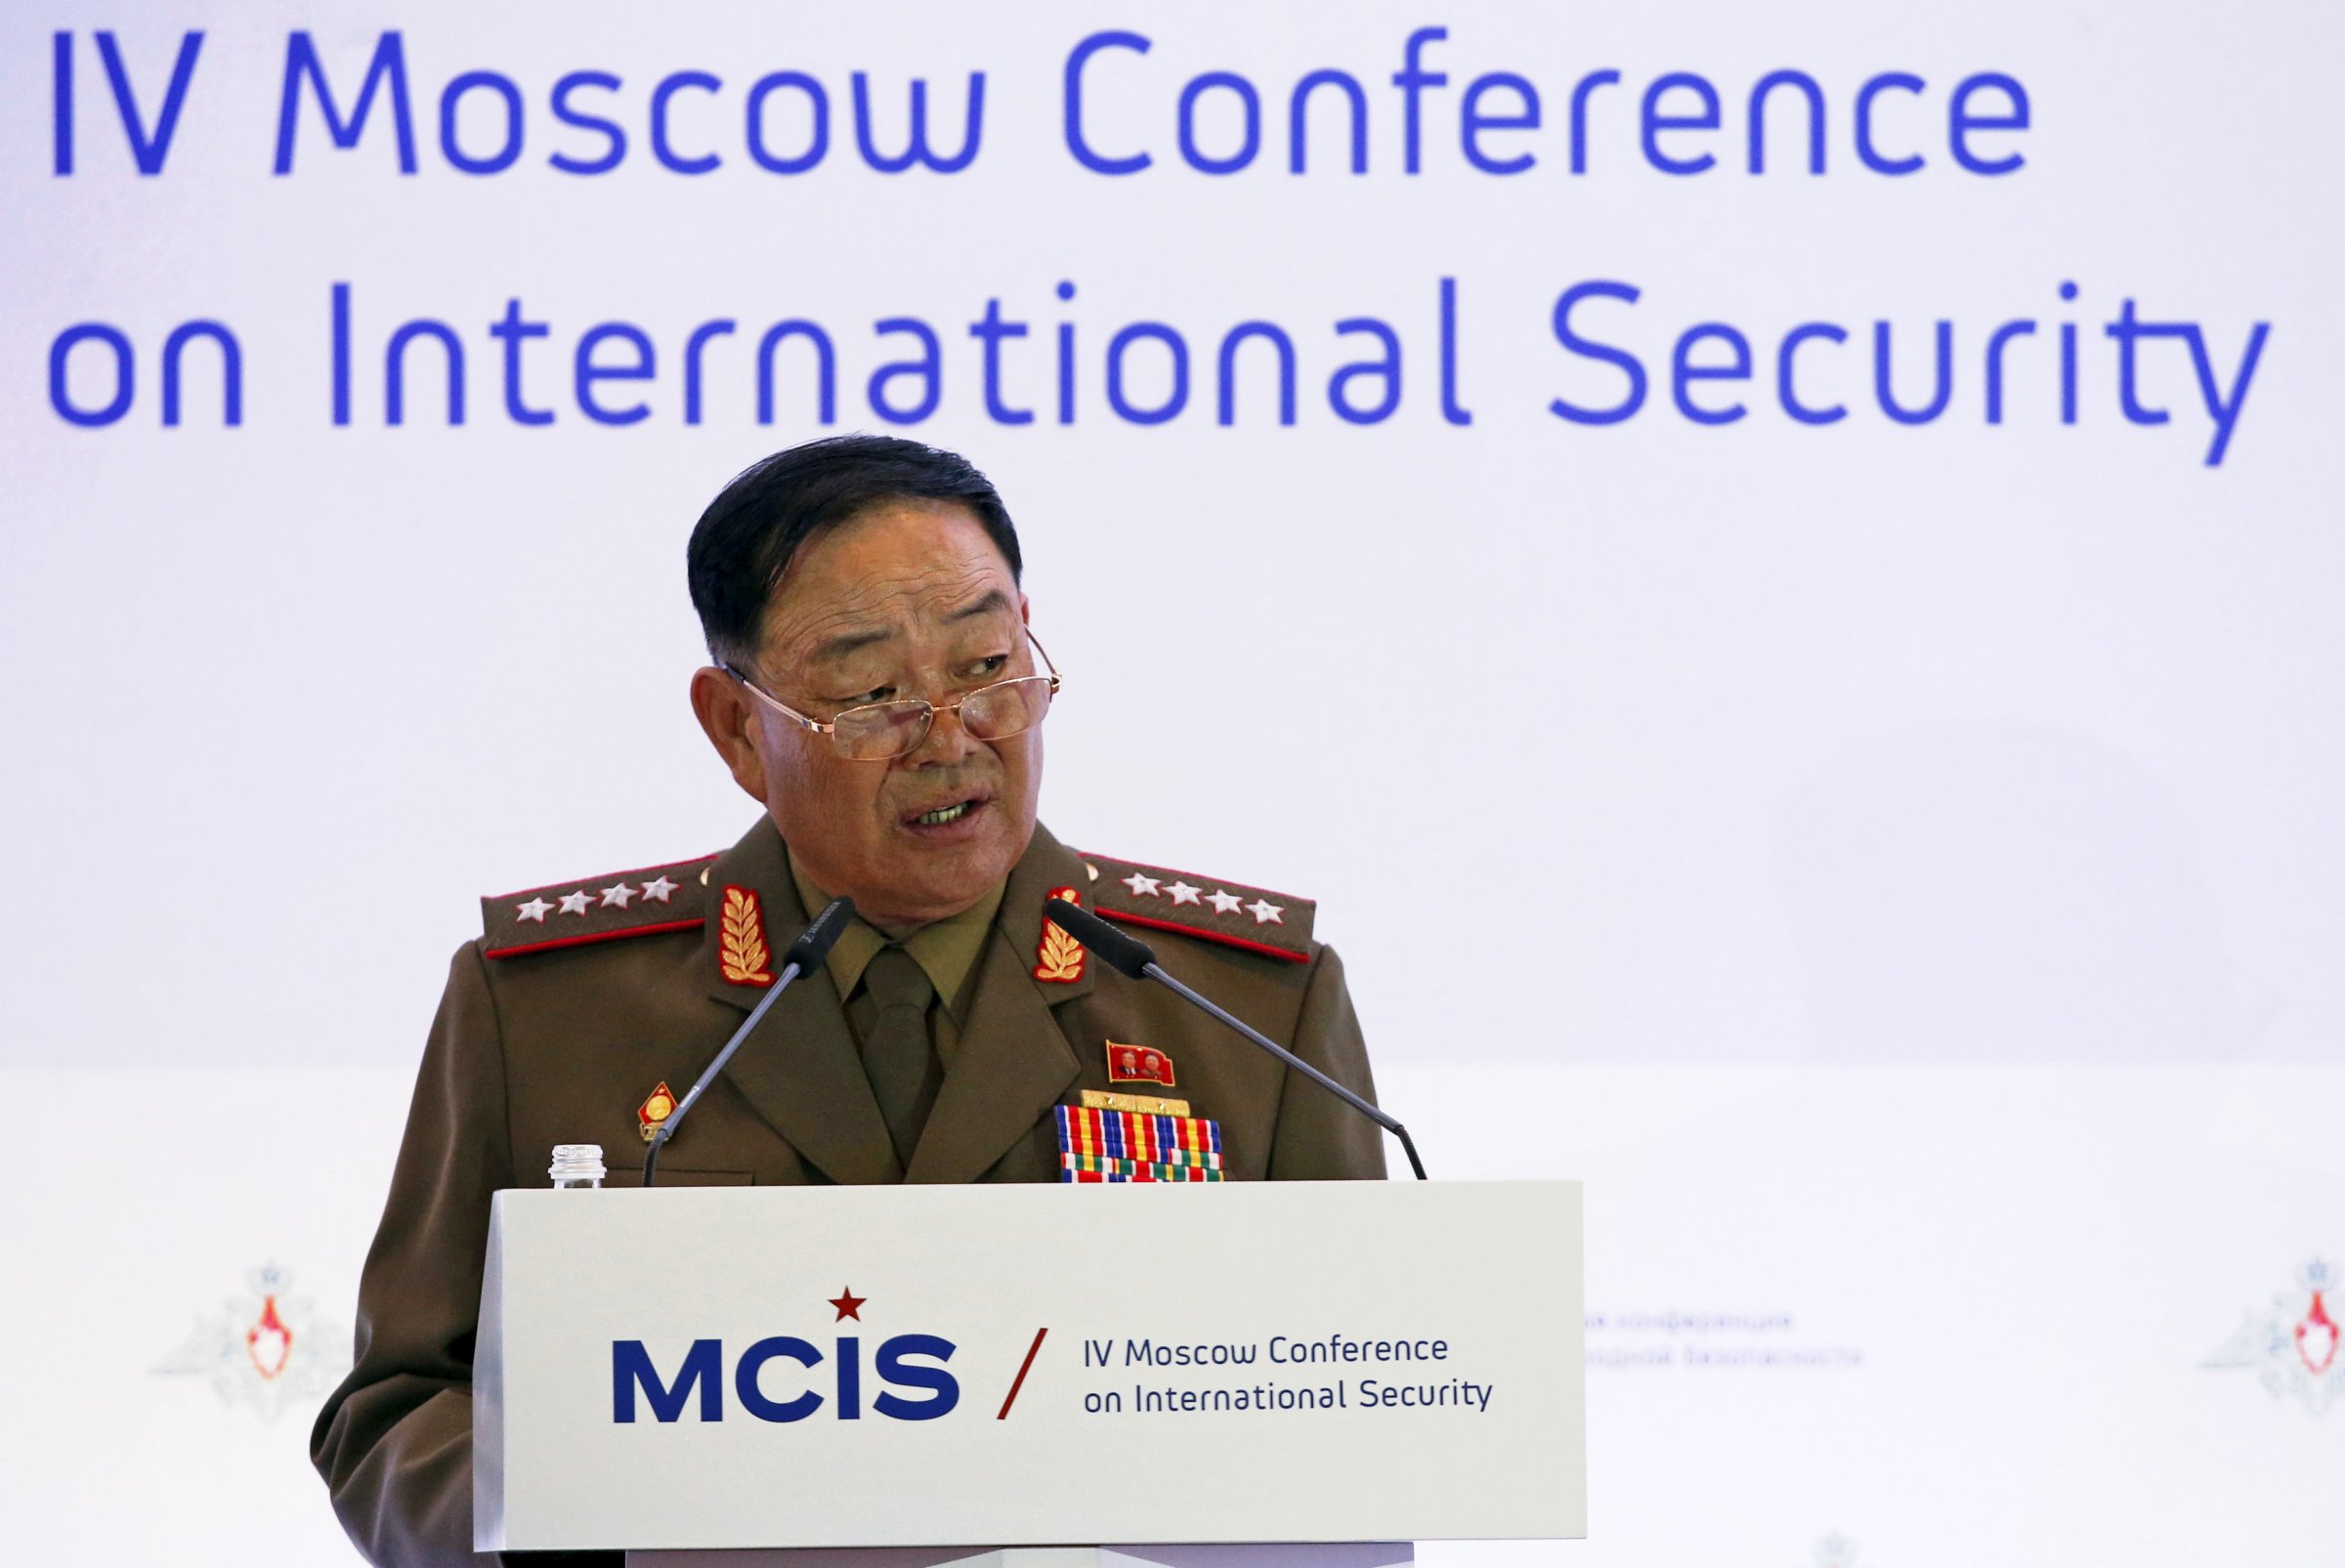 Senior North Korean military officer Hyon Yong Chol delivers a speech during the 4th Moscow Conference on International Security (MCIS) in Moscow April 16, 2015.